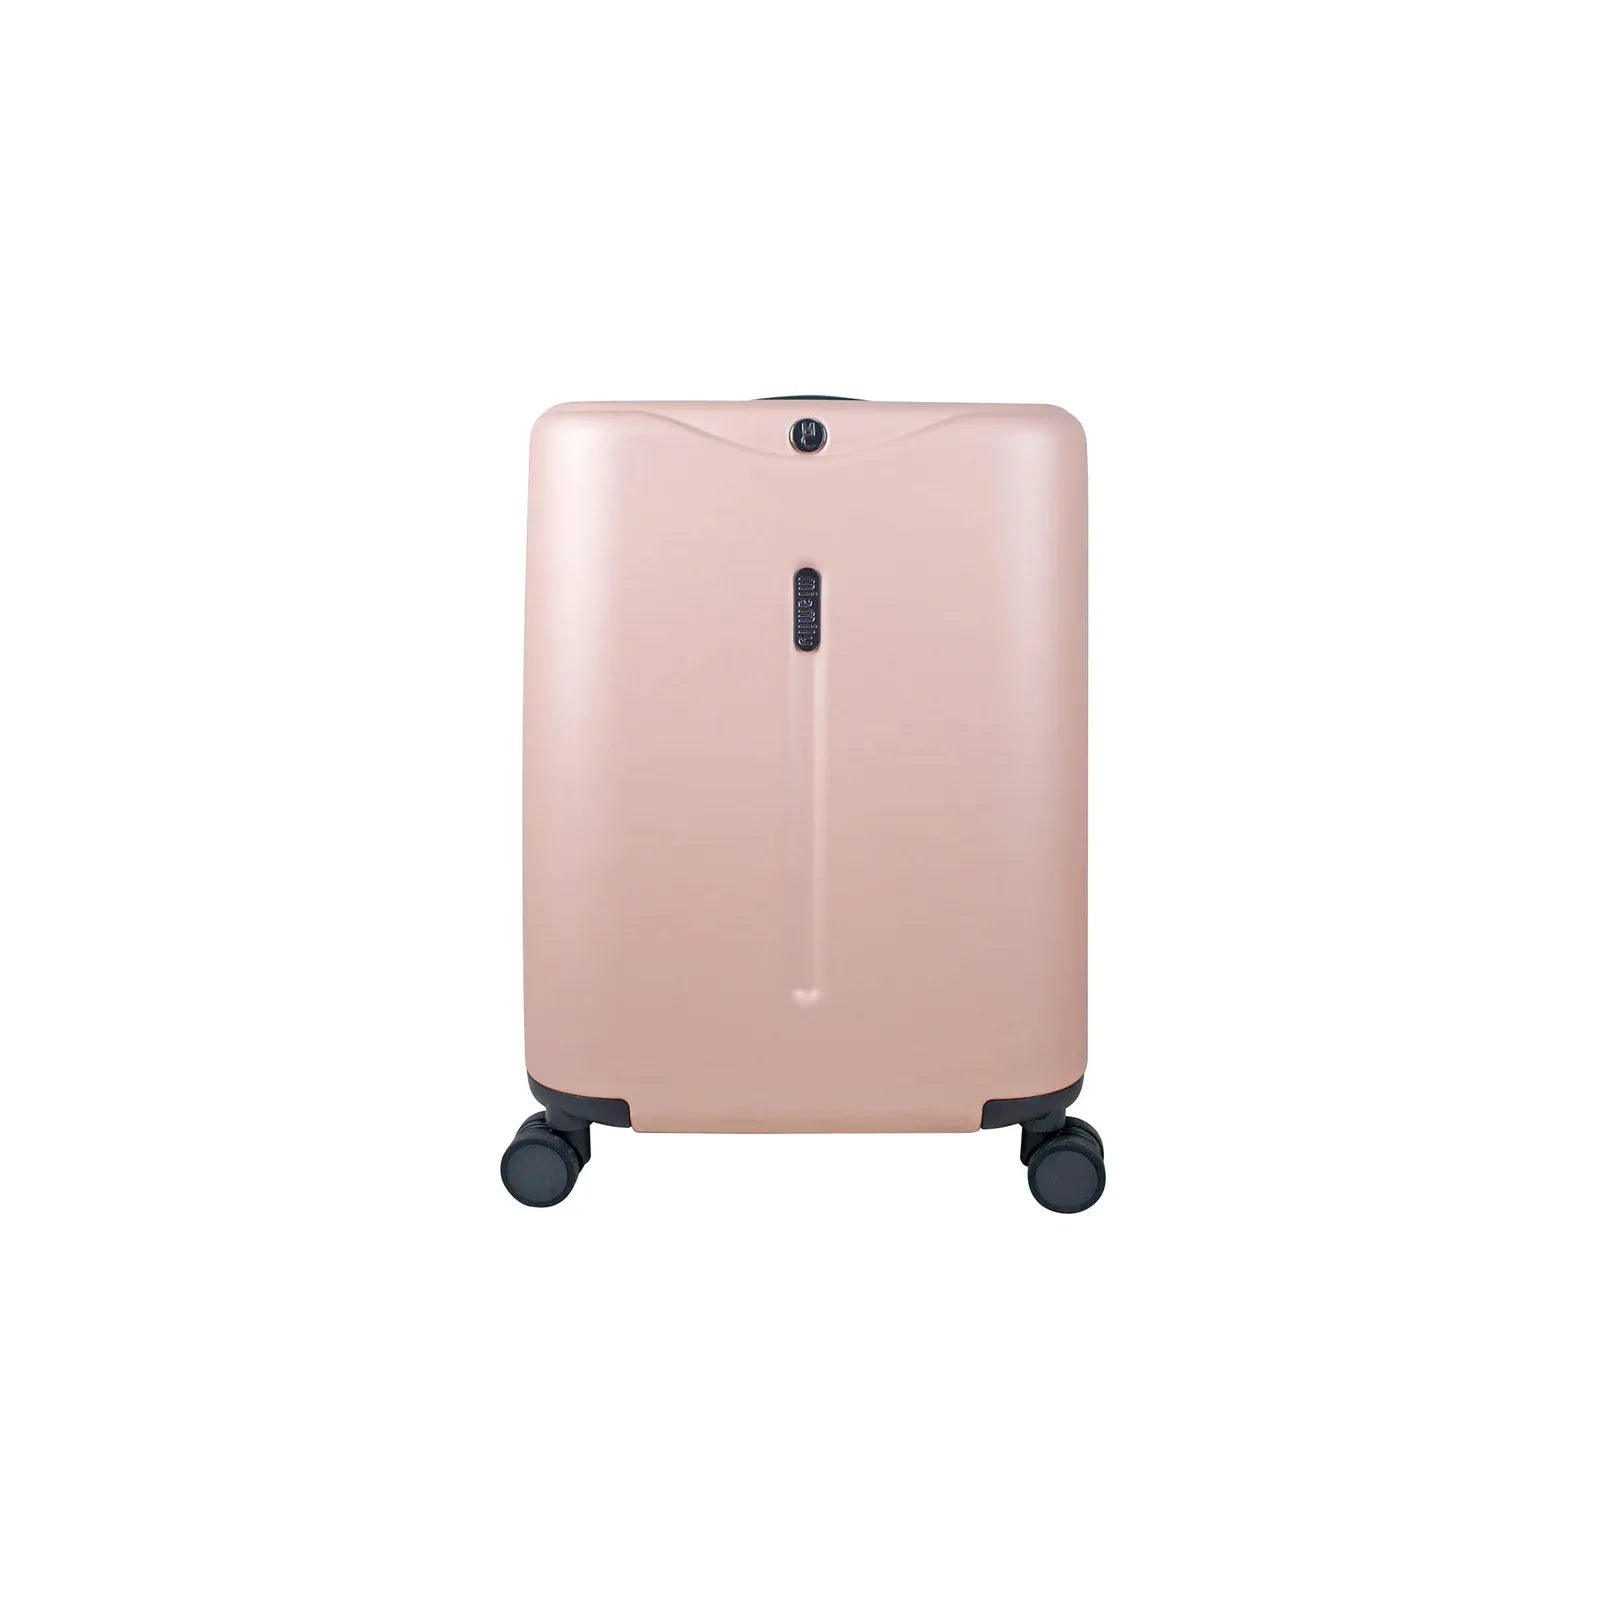 Miamily MultiCarry Ride-On Luggage (Dusty Pink) 18" (PRE-ORDER END JUNE ARRIVAL)